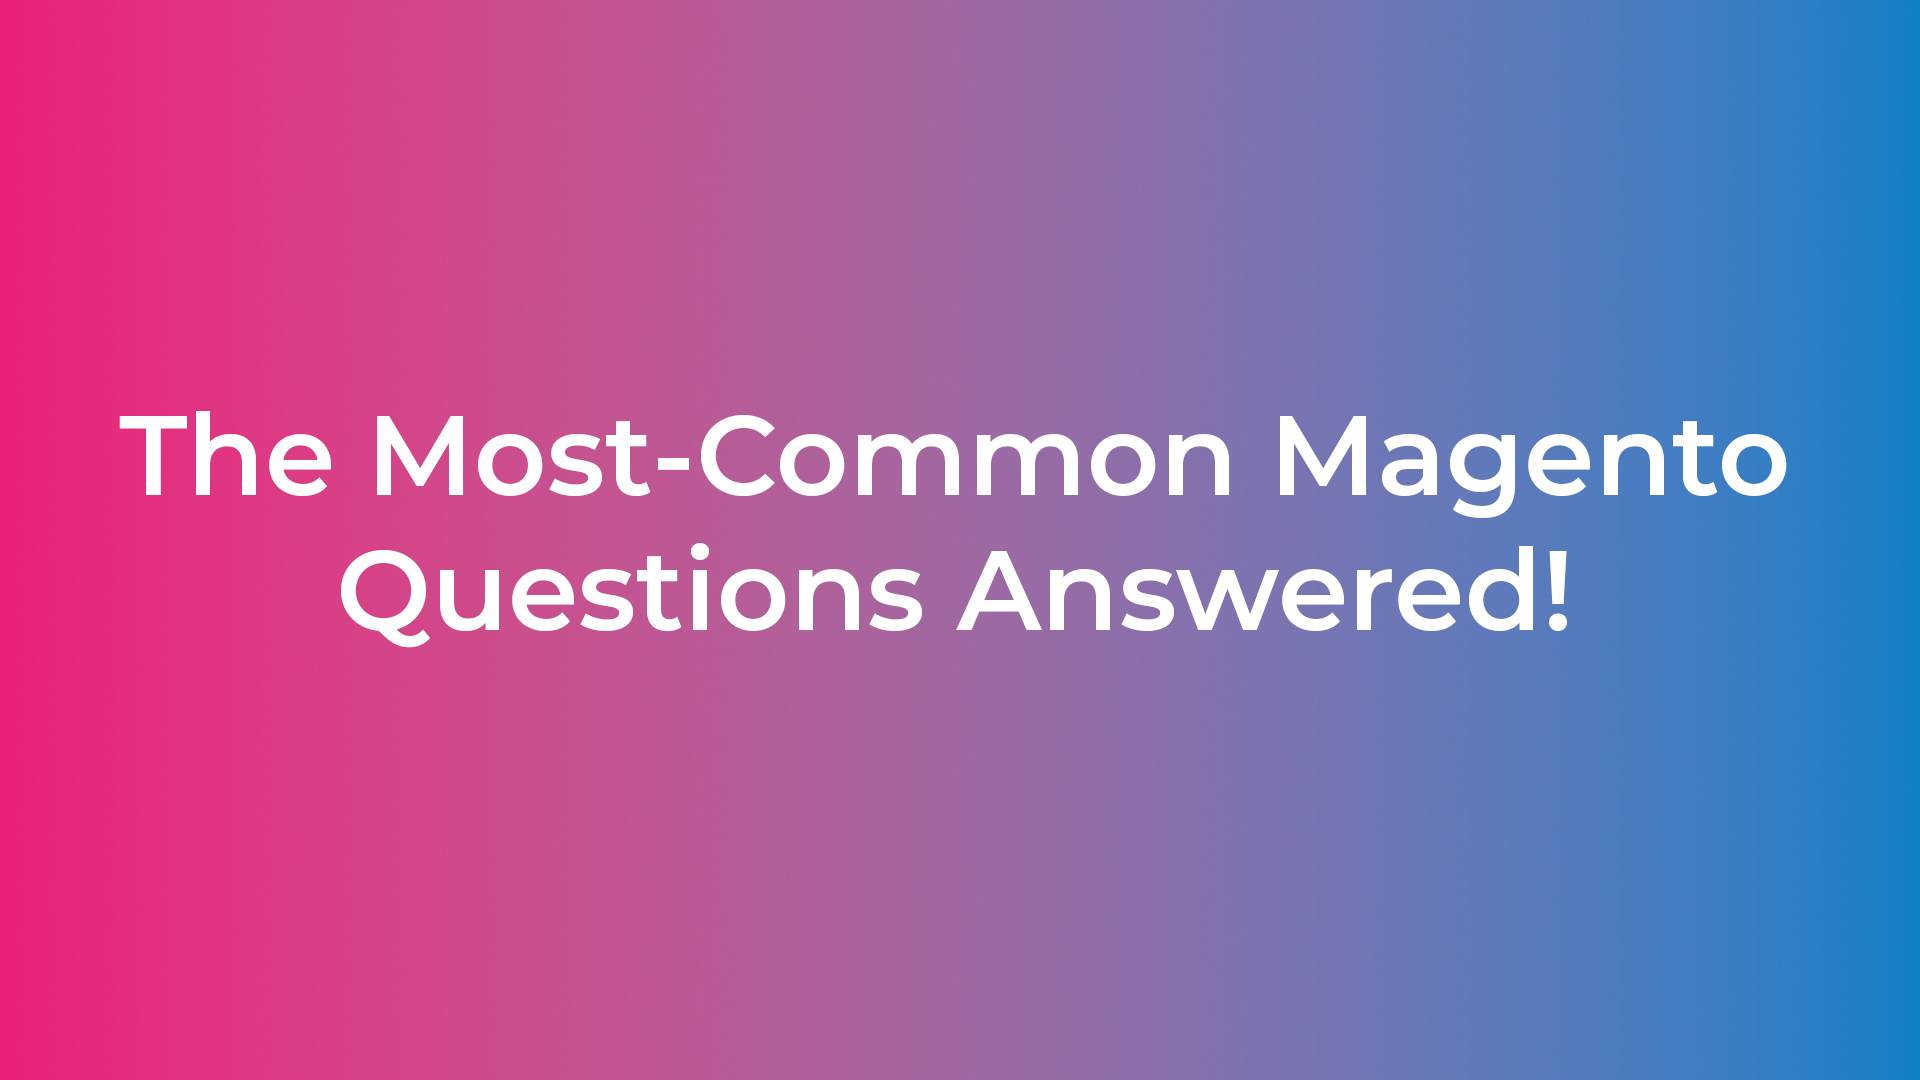 The Most-Common Magento Questions Answered!